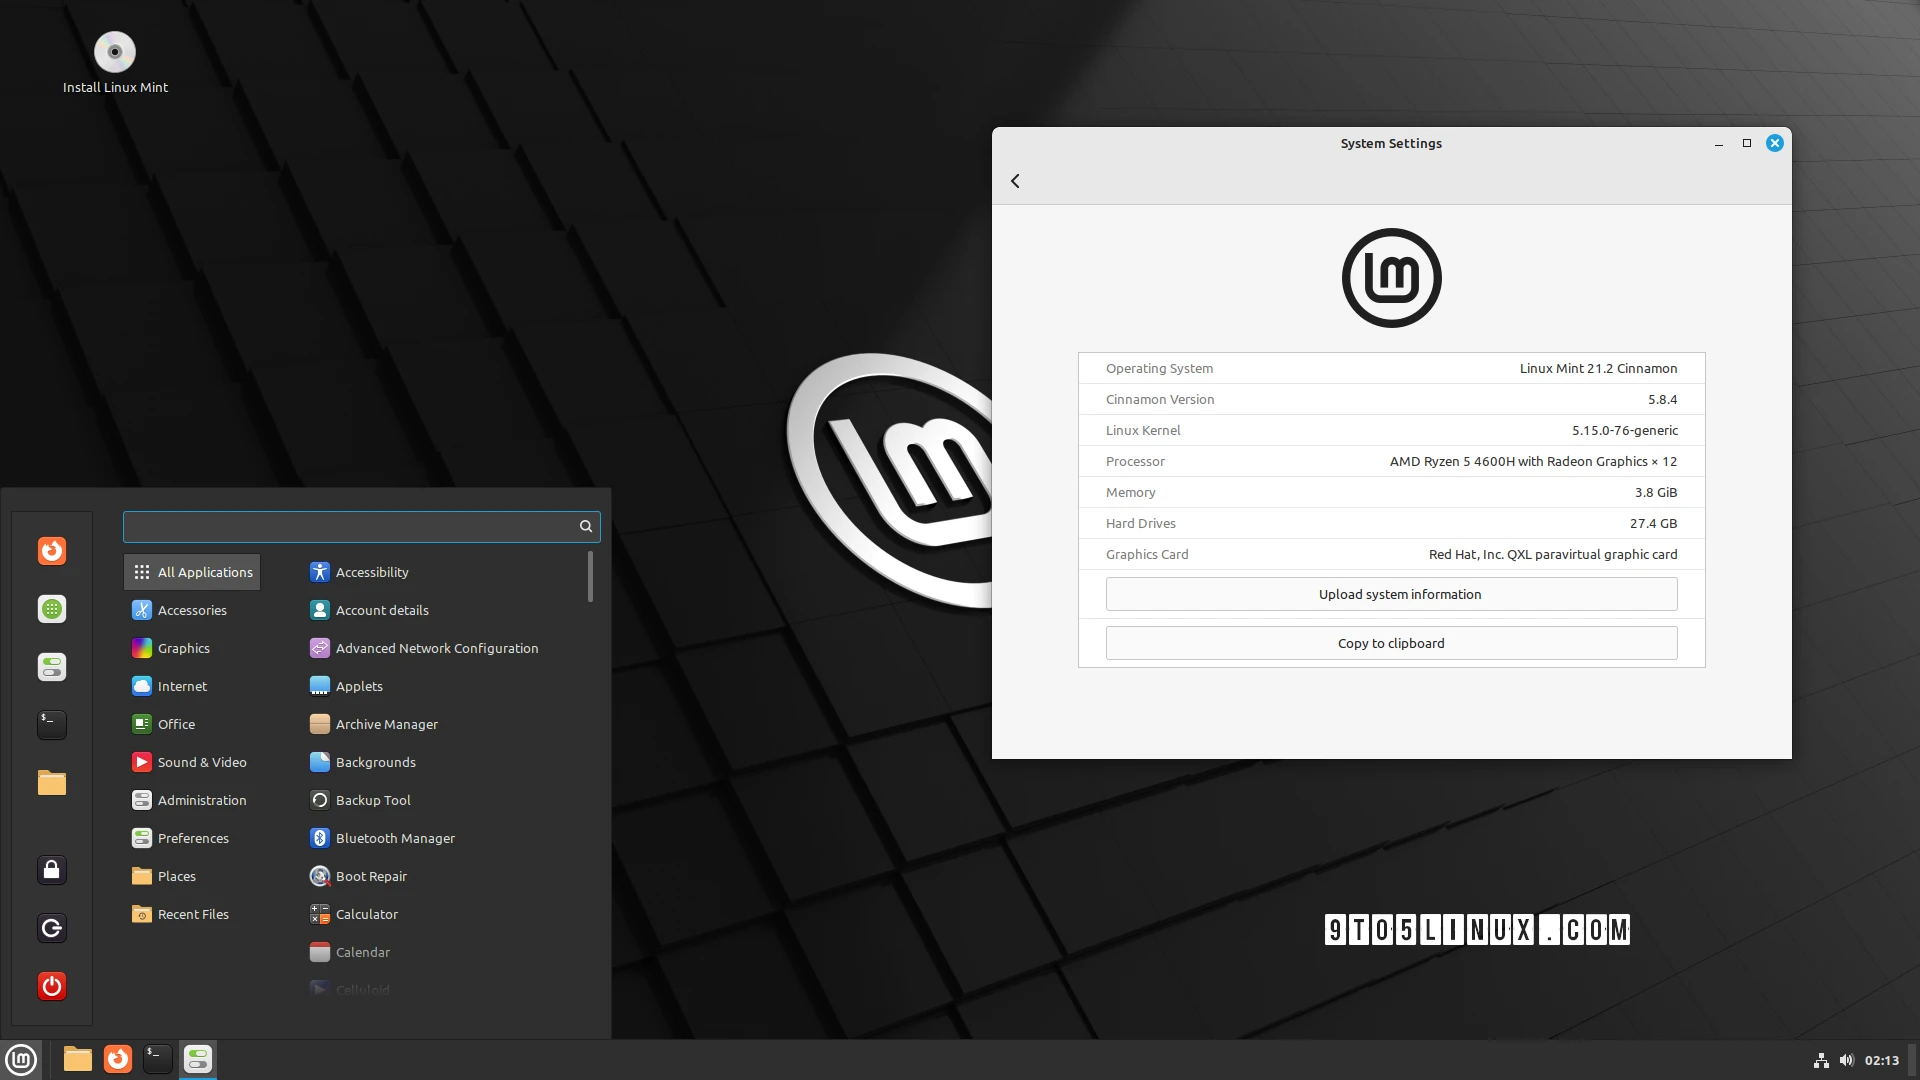 Linux Mint 21.2 “Victoria” Is Now Available for Download, Here’s What’s New